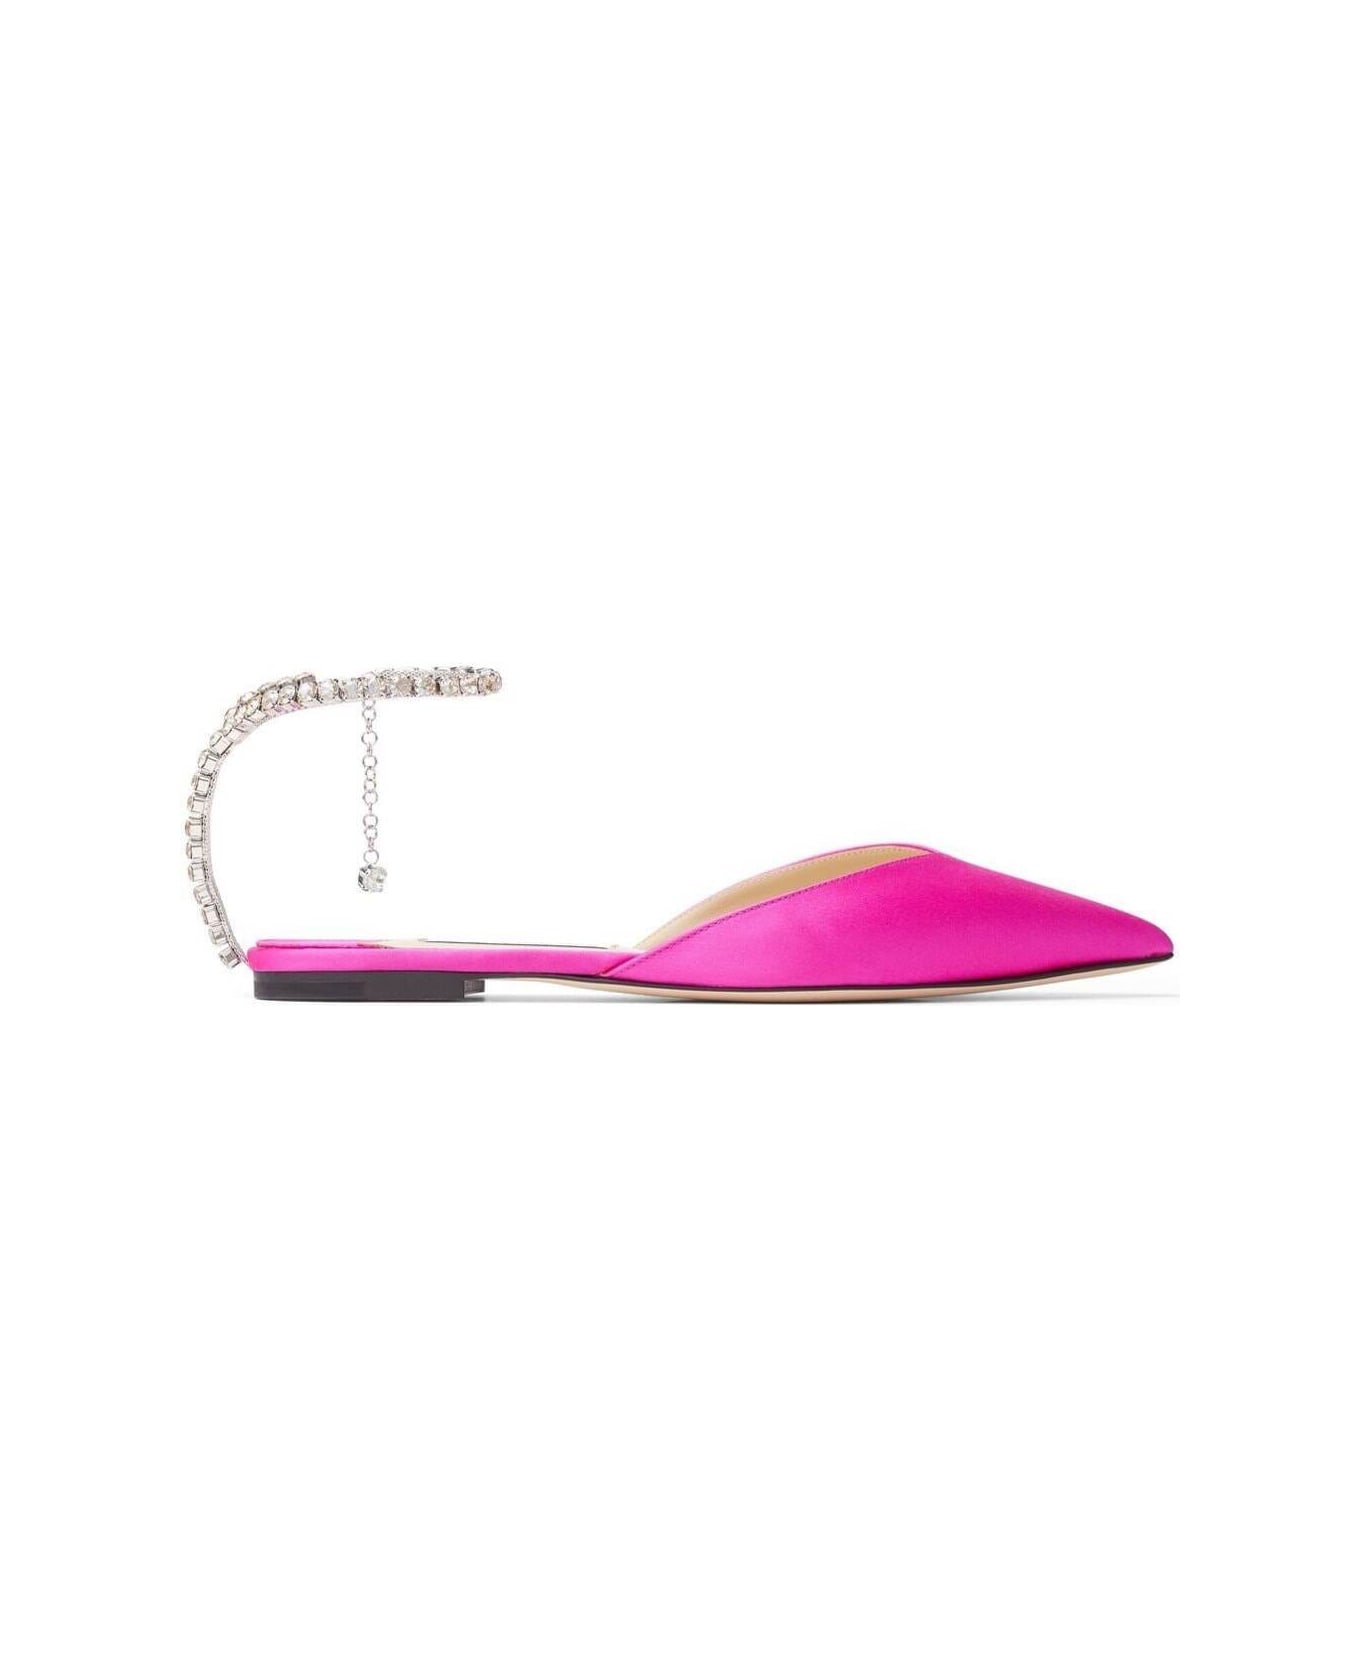 Jimmy Choo Fuchsia Pink Ballerina Flat Shoes With Crystal Embellishment In Satin Woman - Fuxia